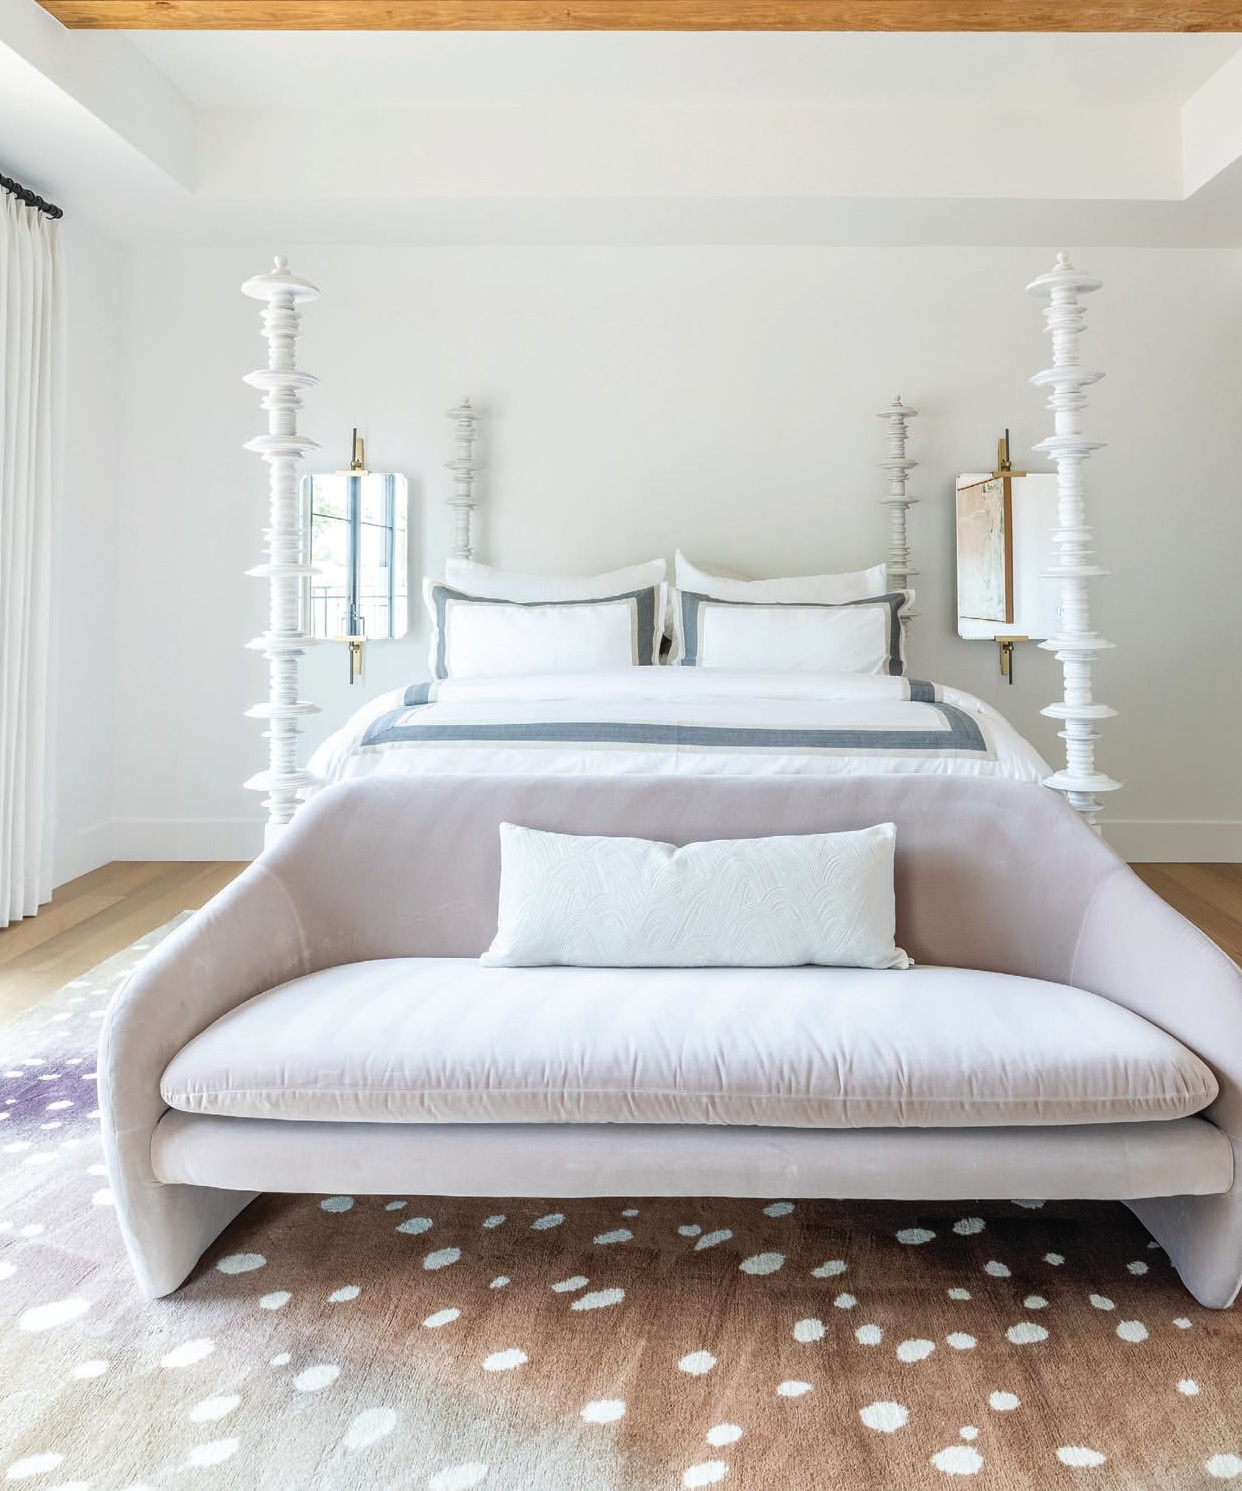 The light and airy primary bedroom is an oasis of calm, with a sculptural bed from Four Hands and a sofa and rug from CB2 taking center stage. Photographed by Flourish Photography